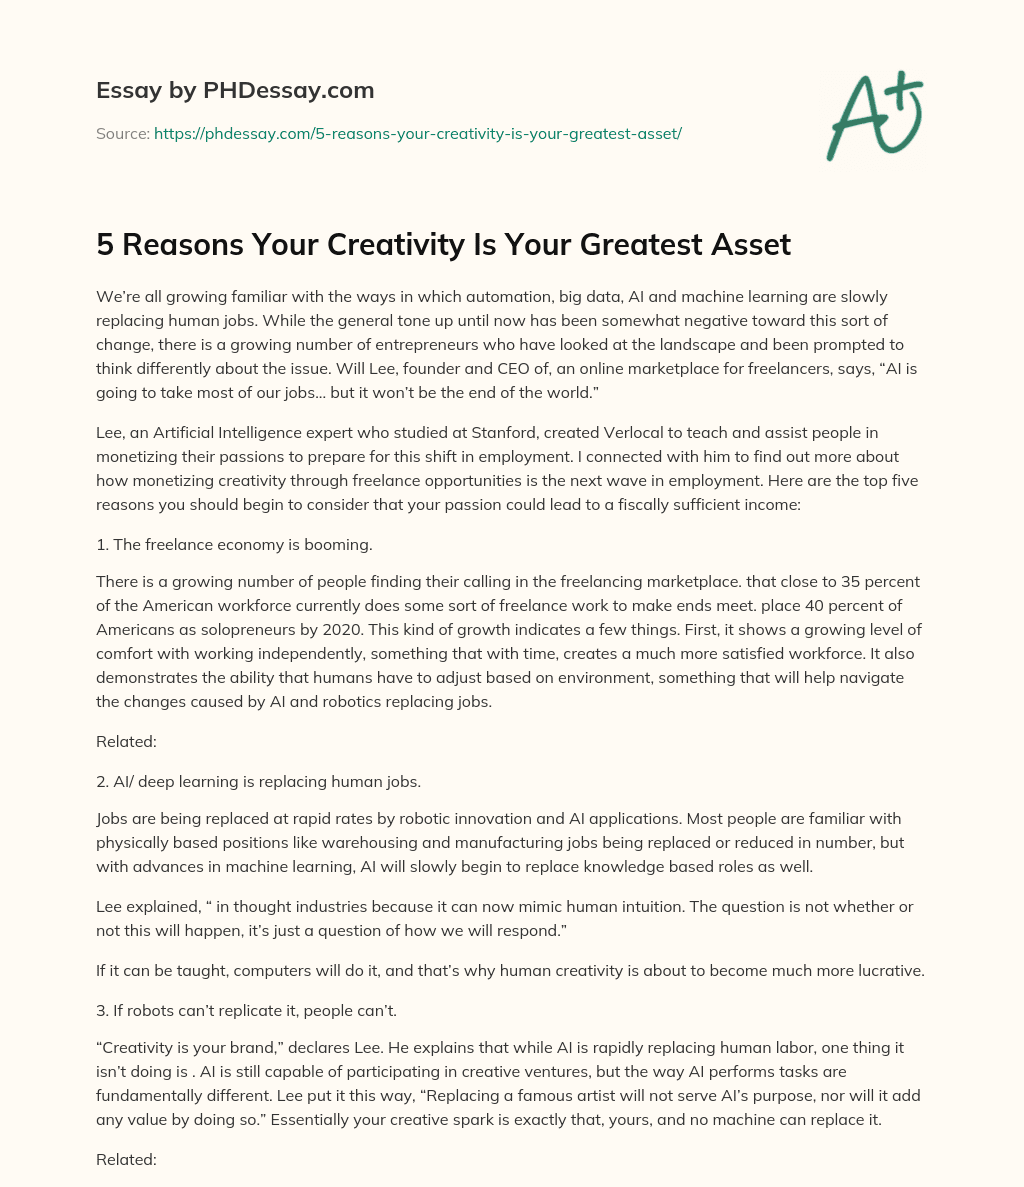 5 Reasons Your Creativity Is Your Greatest Asset essay